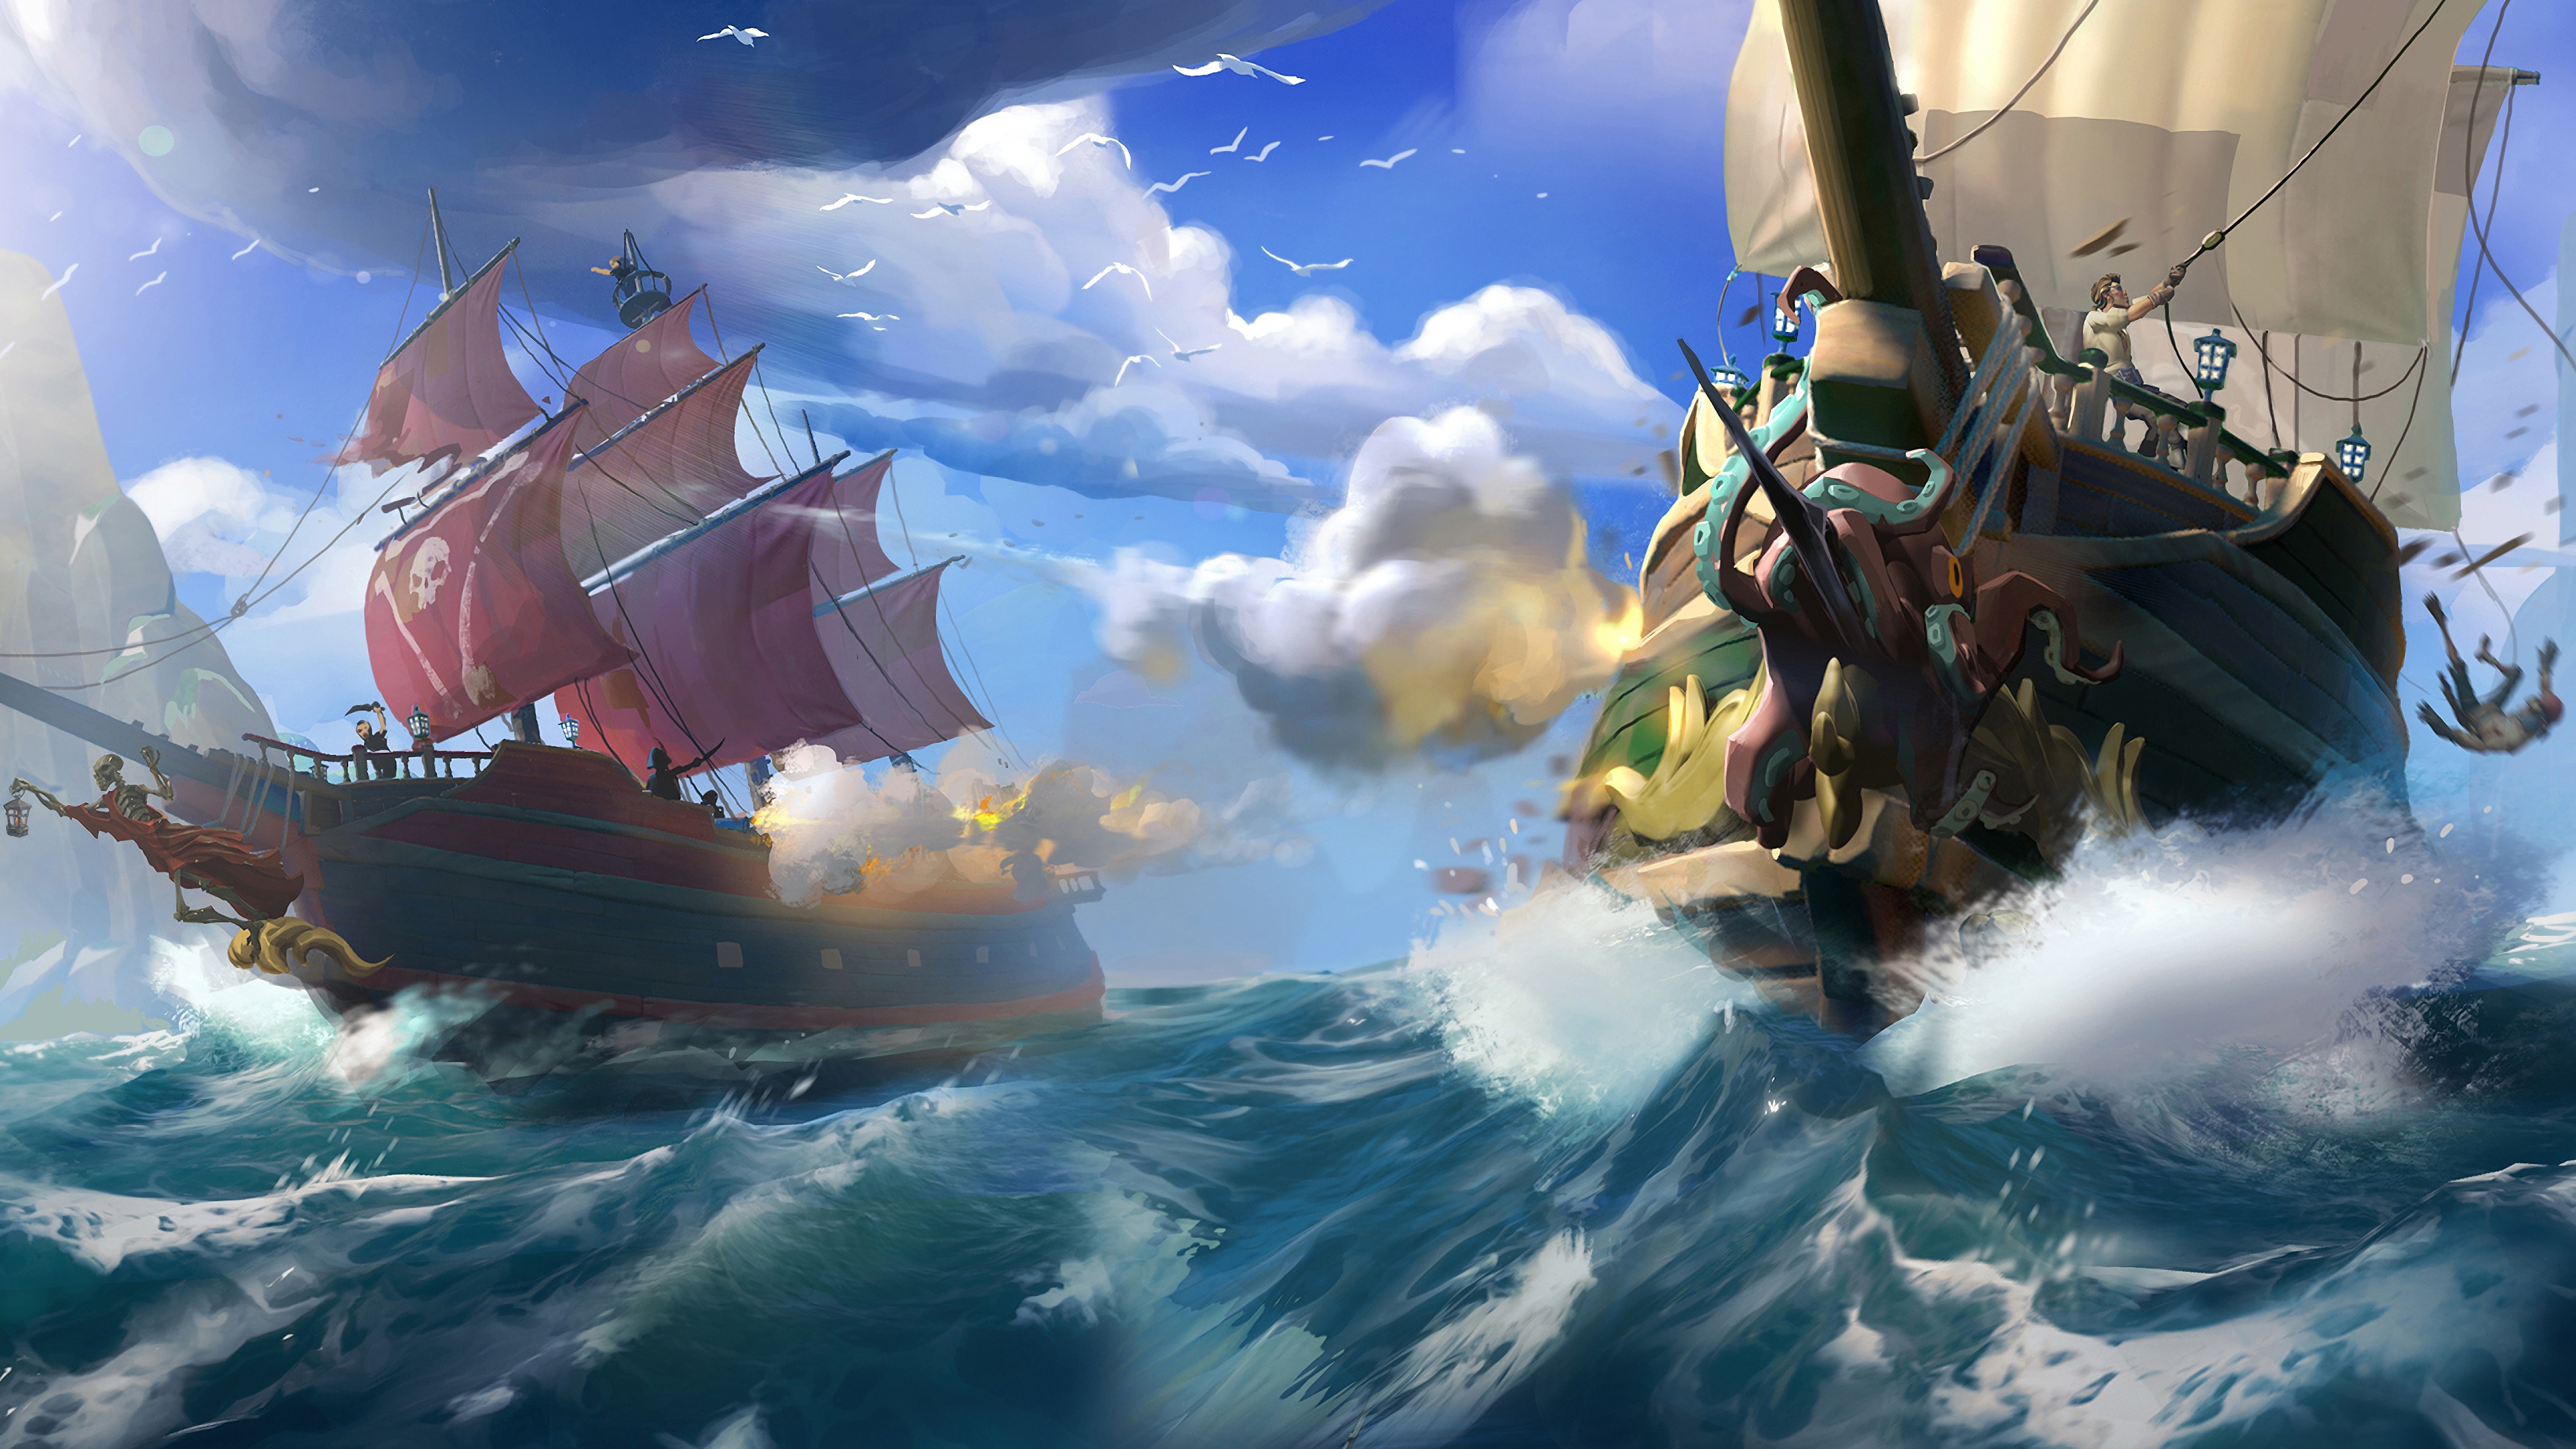 Video Game Sea Of Thieves 4k Ultra HD Wallpaper